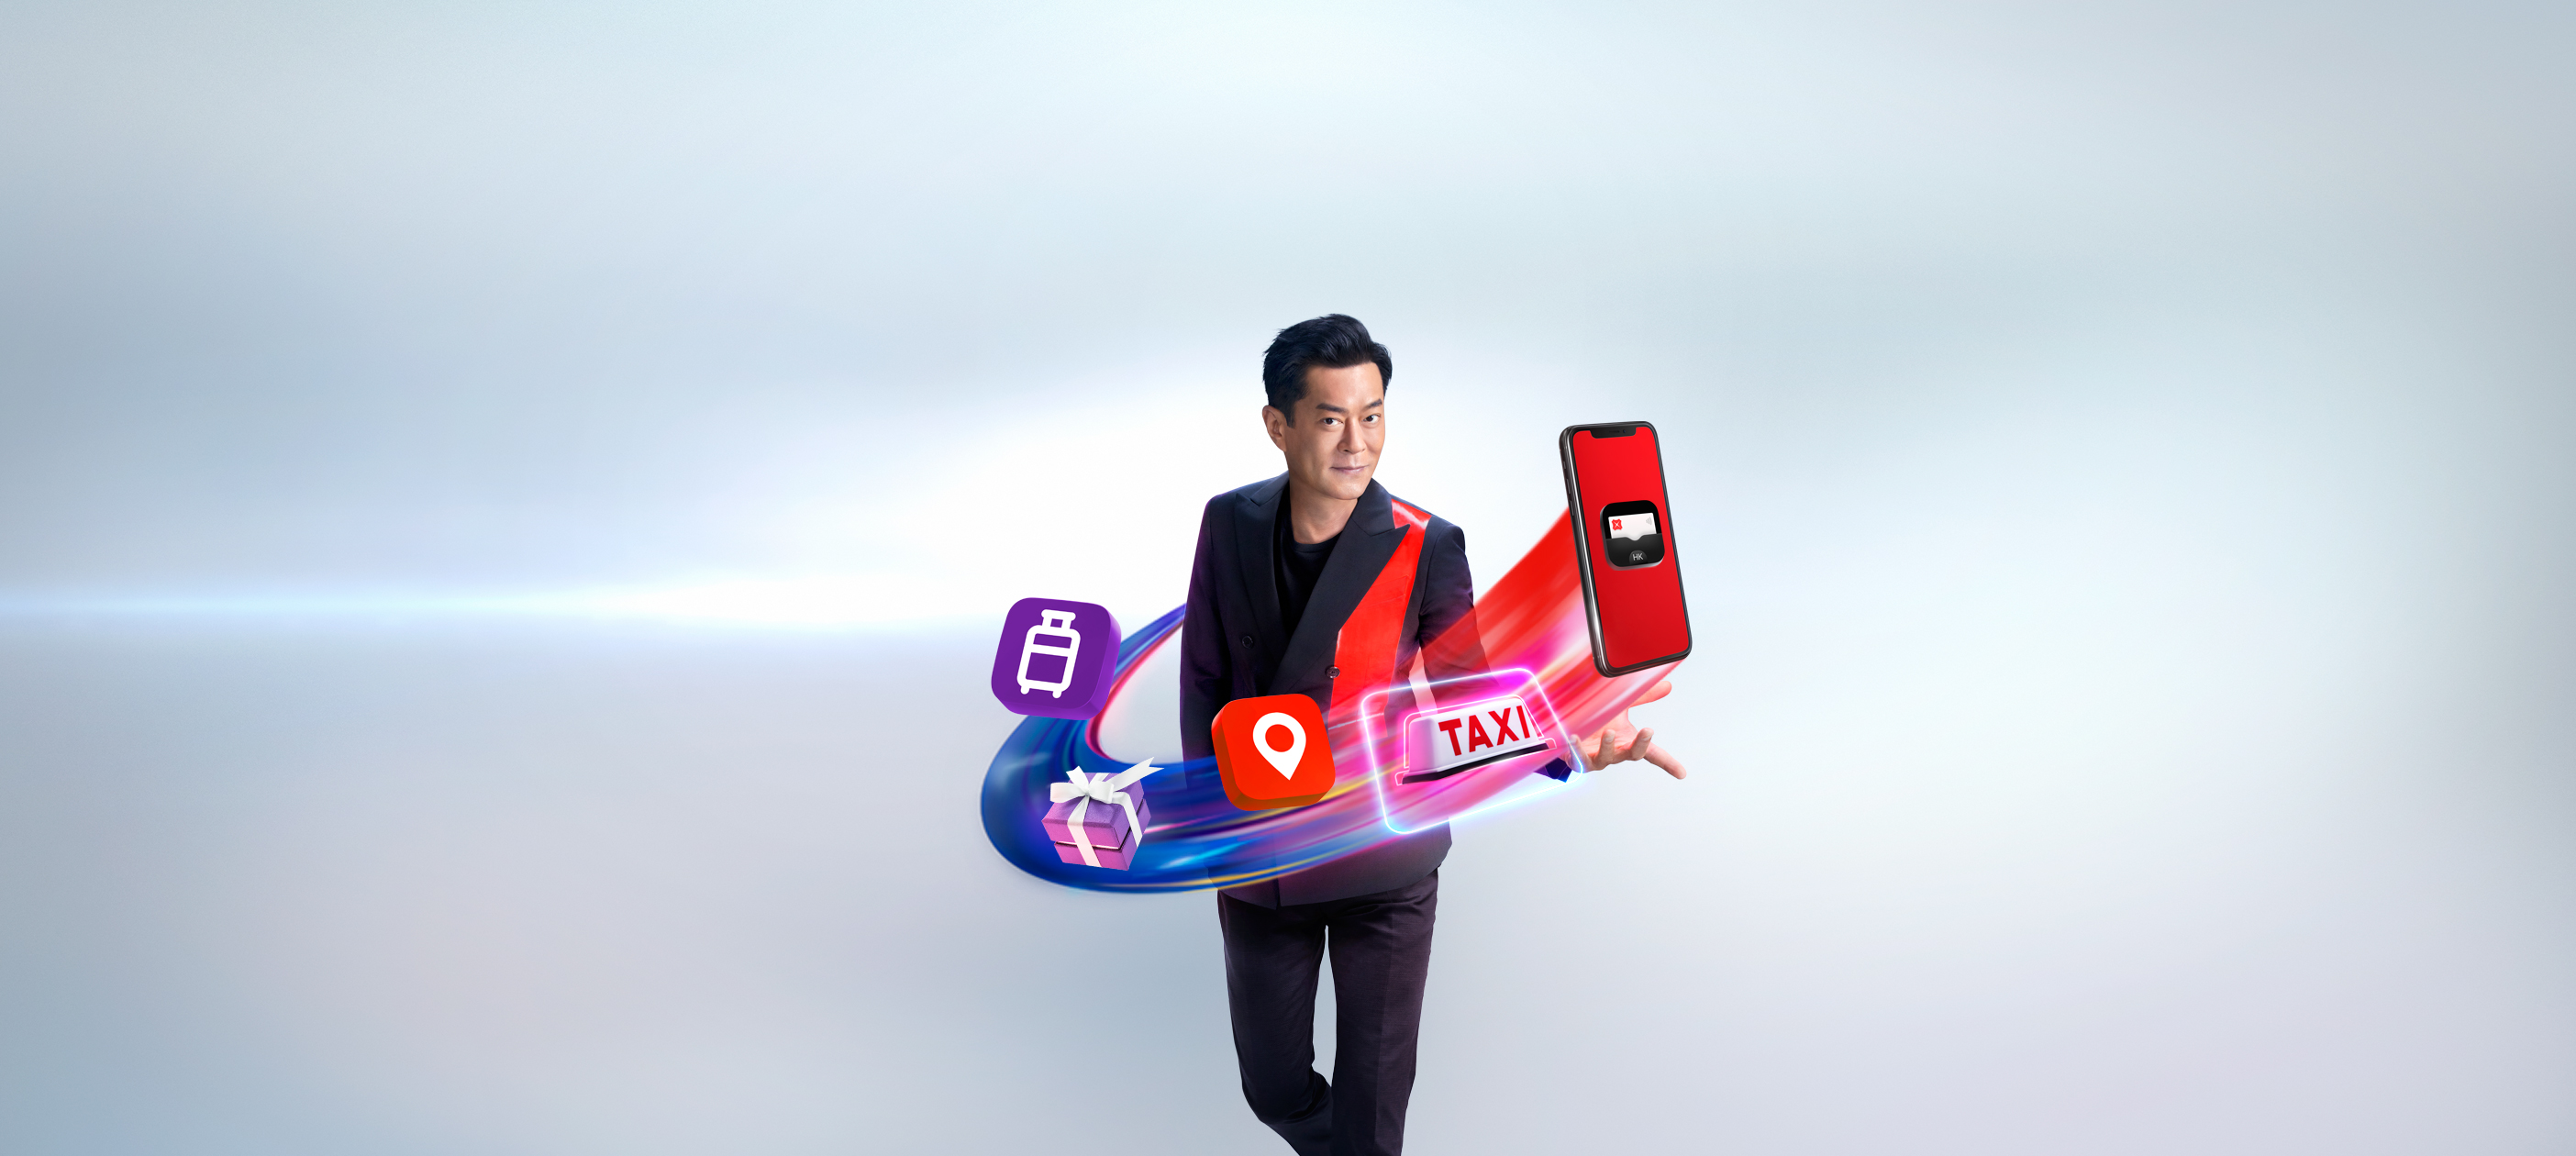 HKTaxi "InstaRedeem" Offer First Ride Offer and Incredible “InstaRedeem” conversion rate